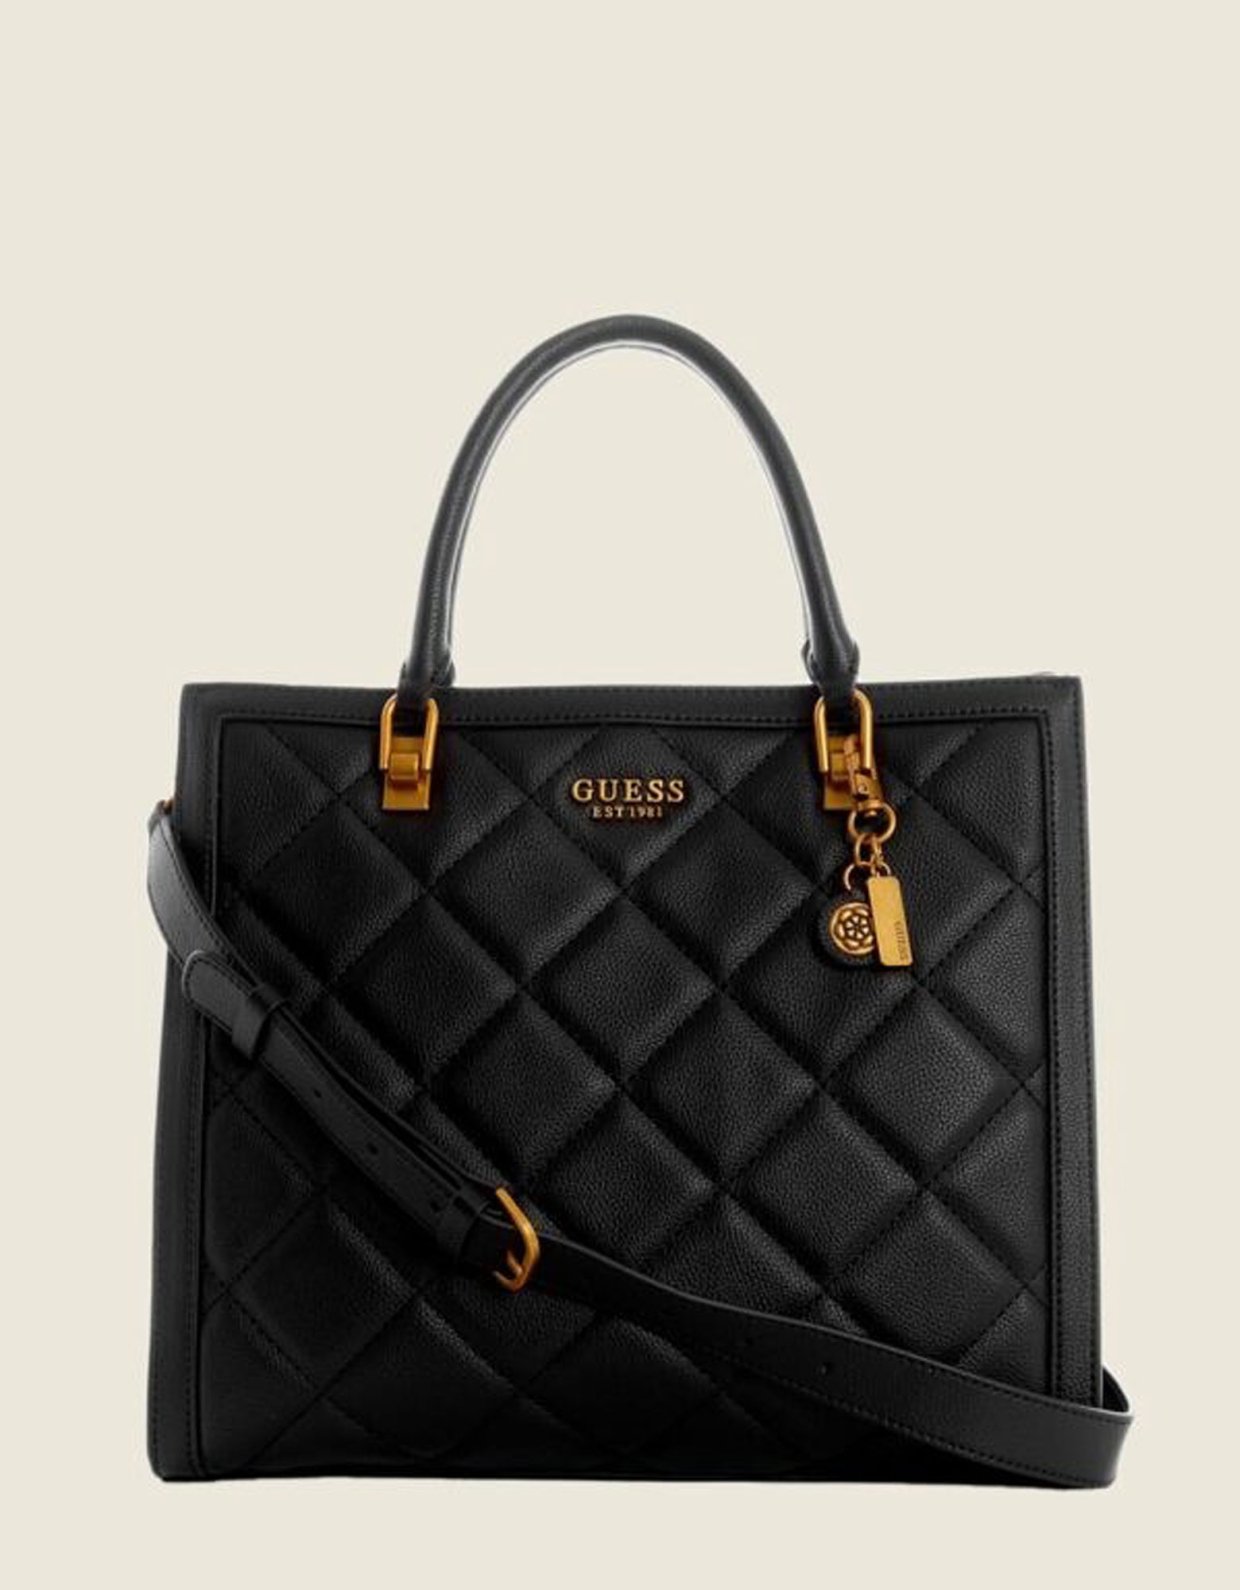 Guess Abey elite tote quilted bag black